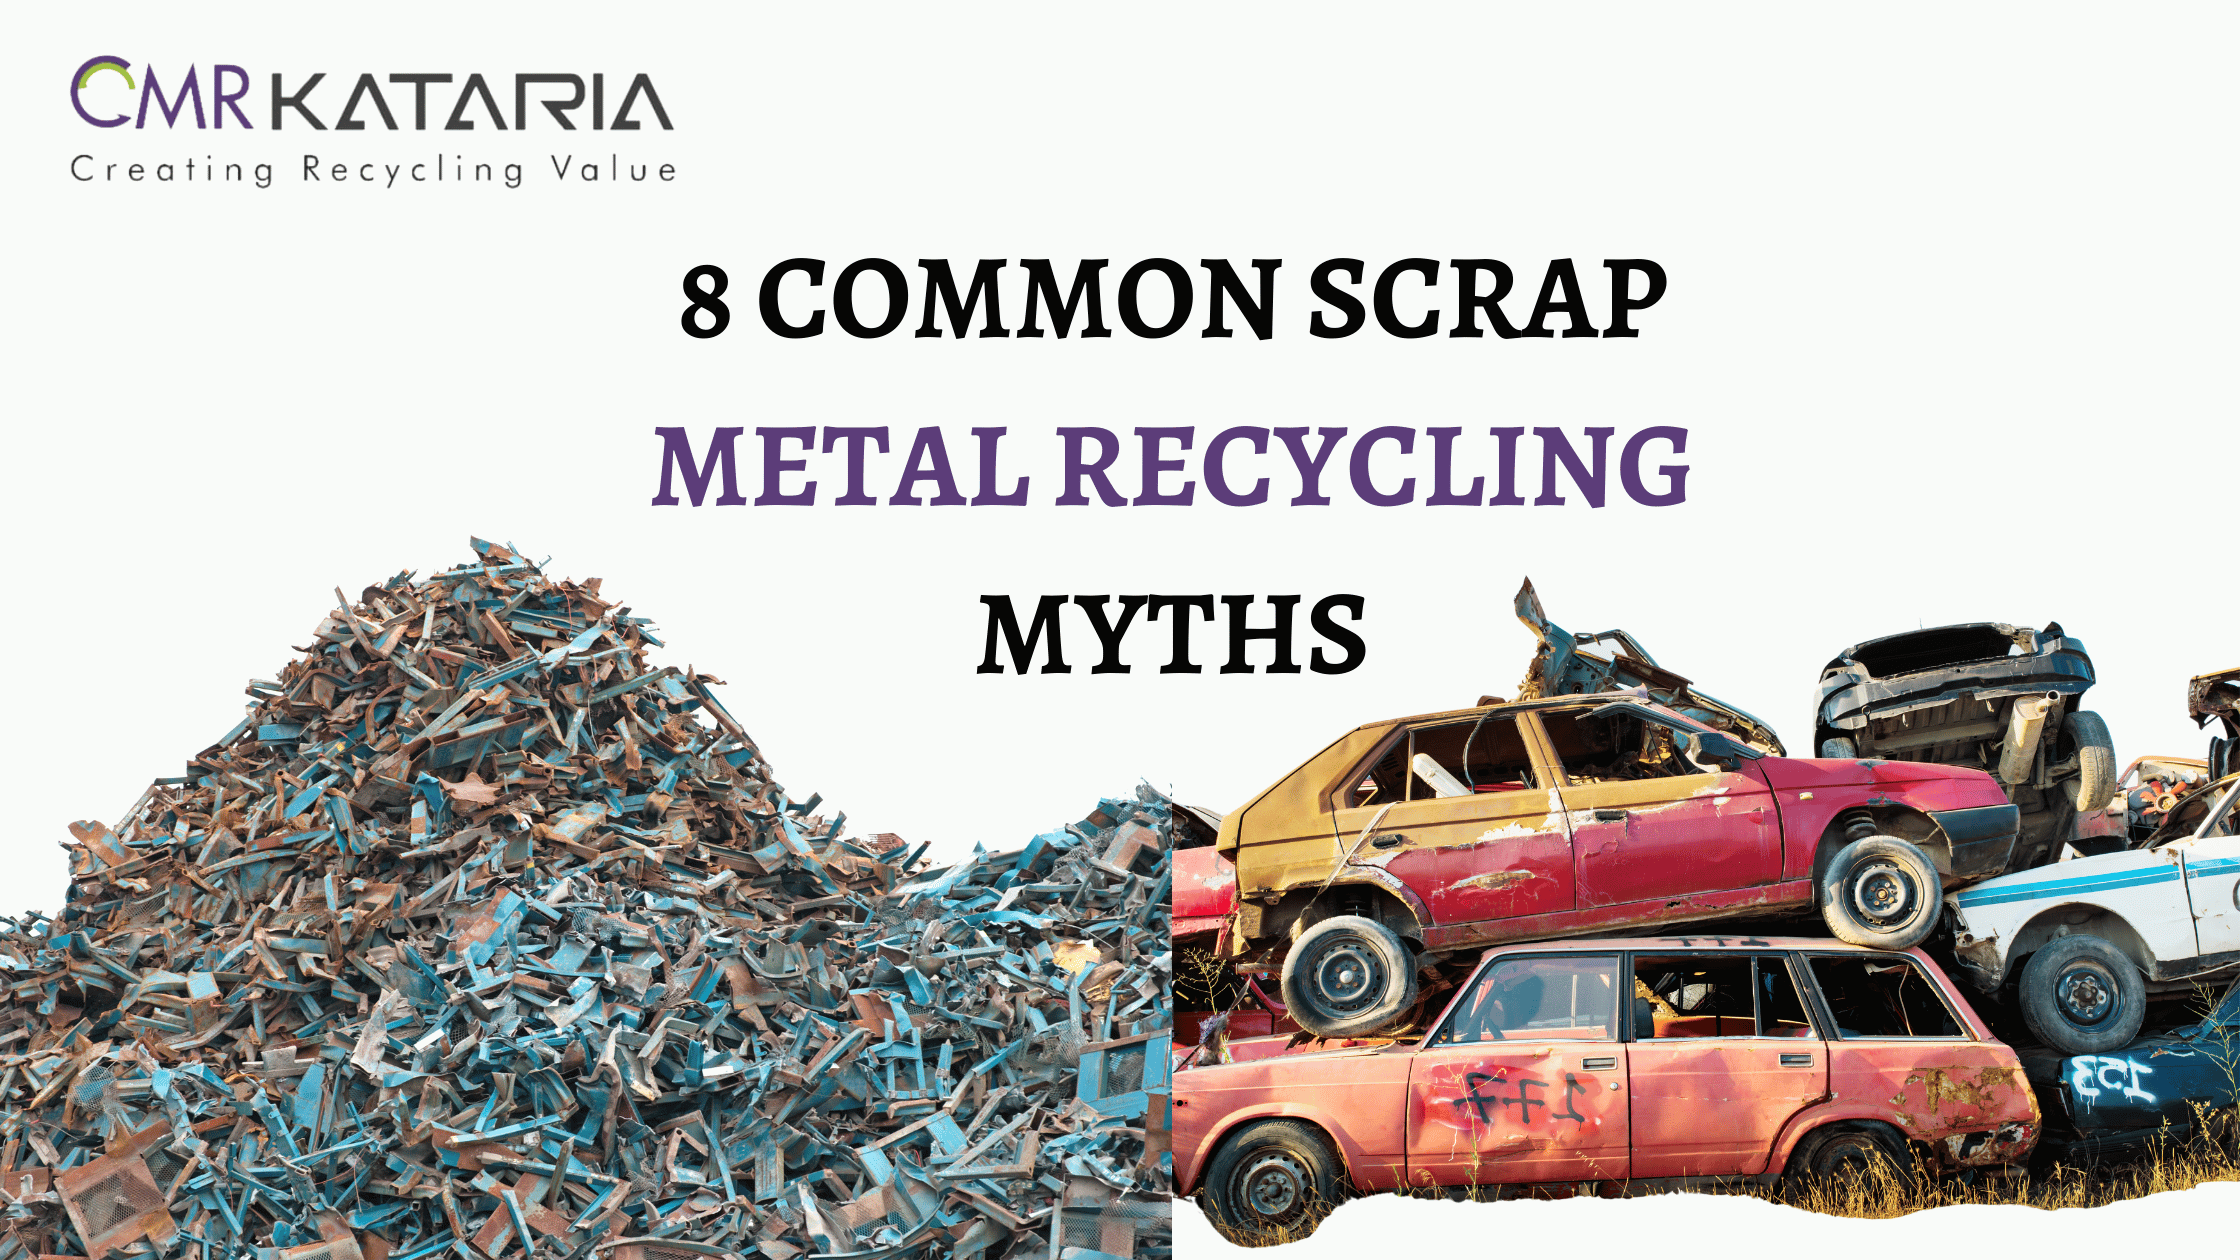 8 COMMON SCRAP METAL RECYCLING MYTHS